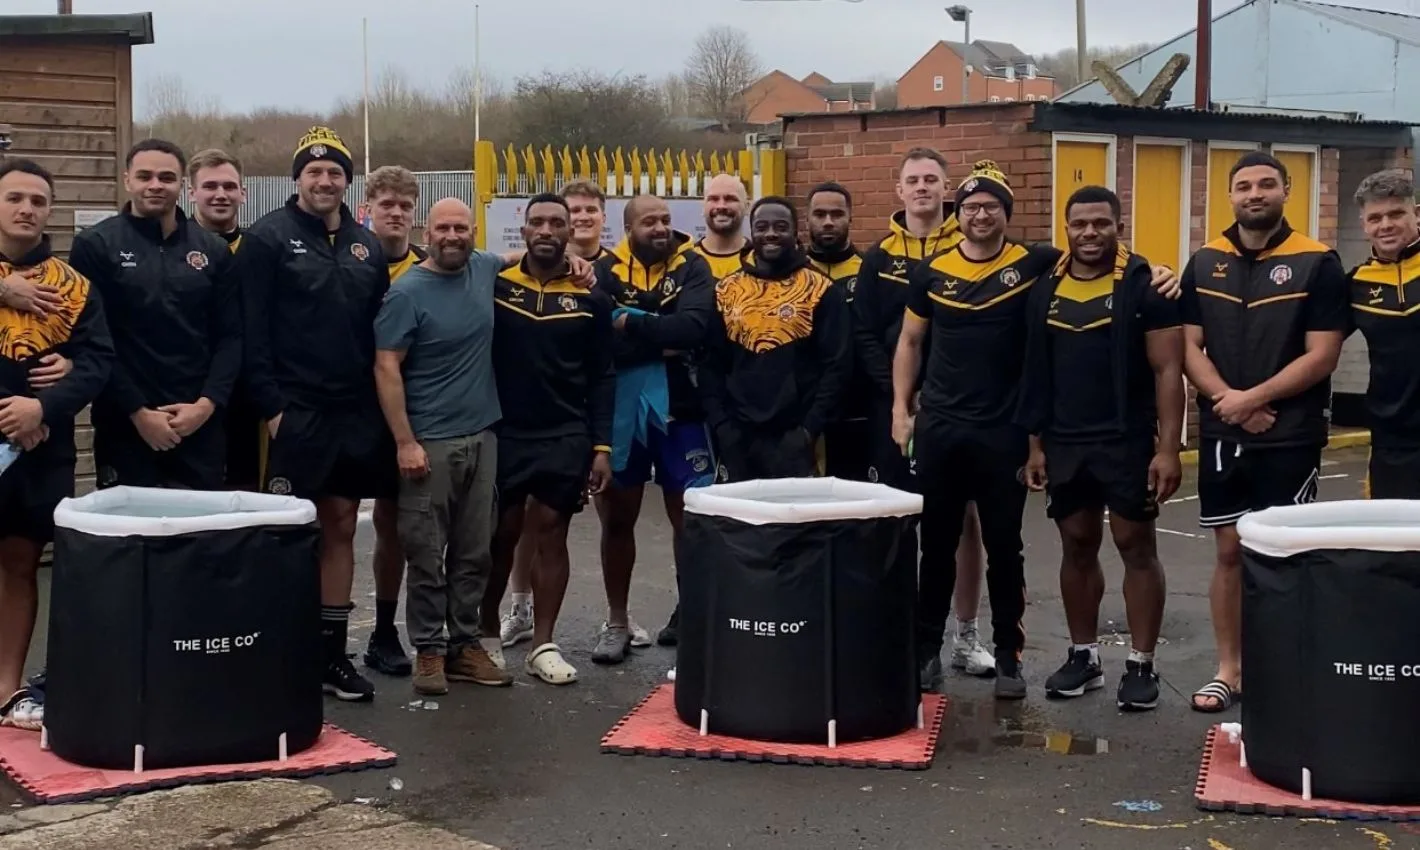 Castleford Tigers Rugby Squad pose for picture behind The Ice Co Ice Baths